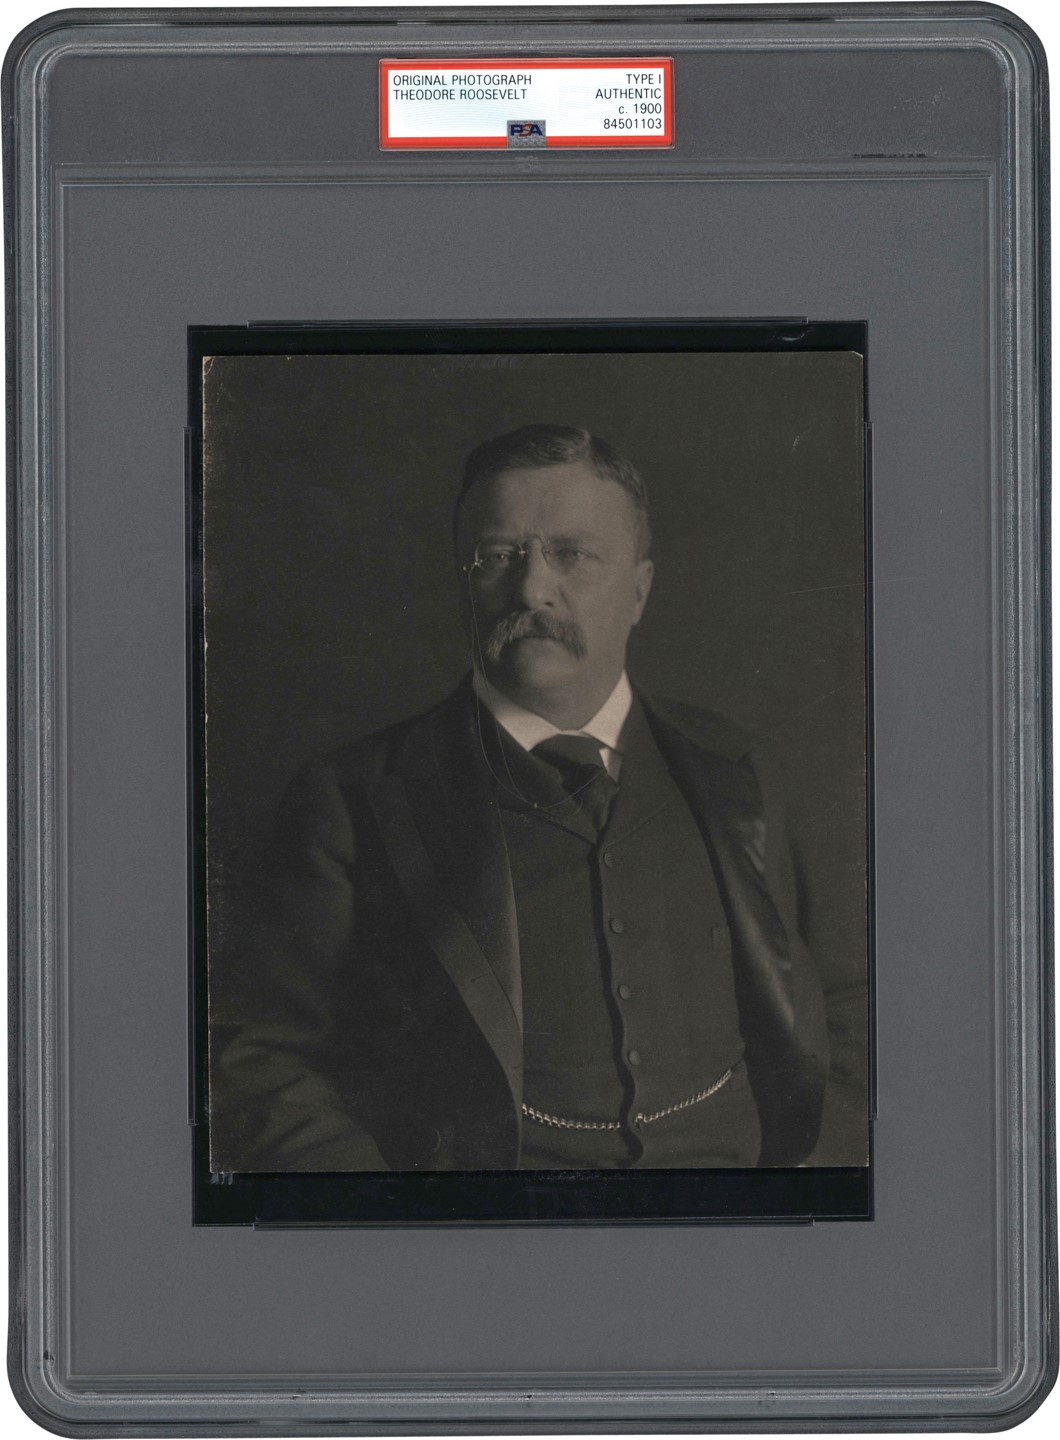 The Brown Brothers Collection - Teddy Roosevelt Photograph (PSA Type I)